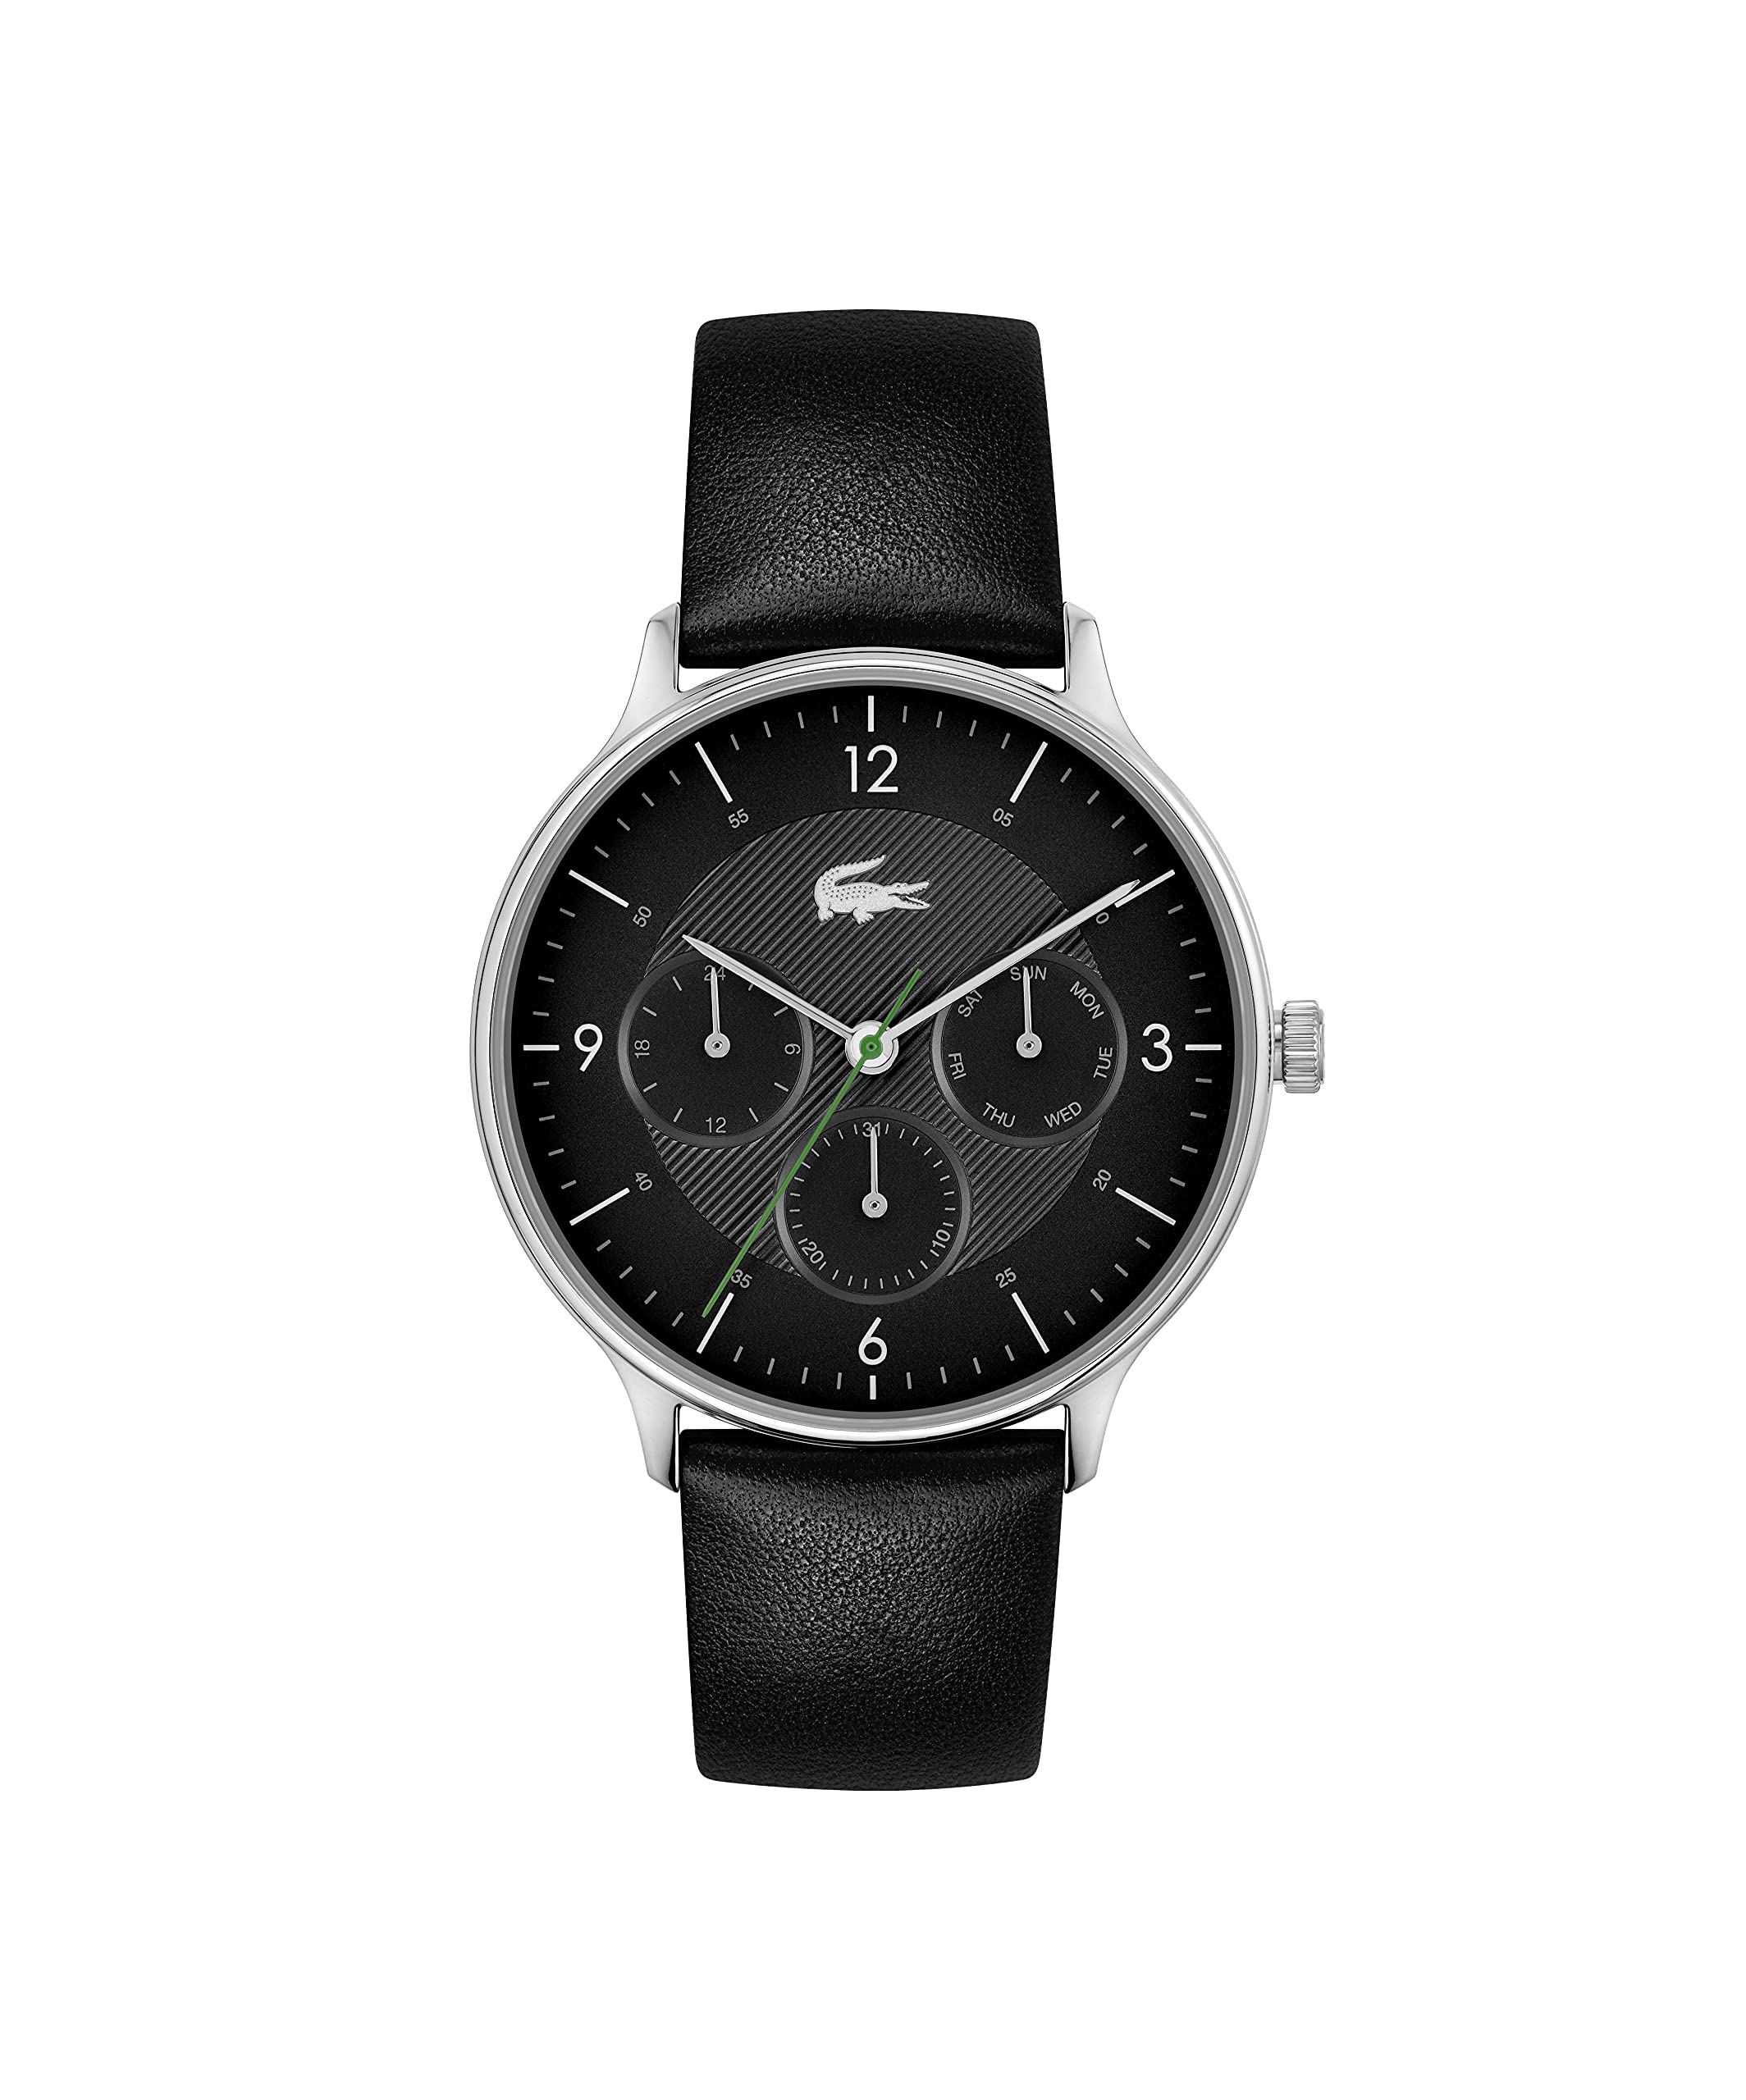 Lacoste Men's Stainless Steel Quartz Watch with Leather Strap, Black, 20 (Model: 2011139)